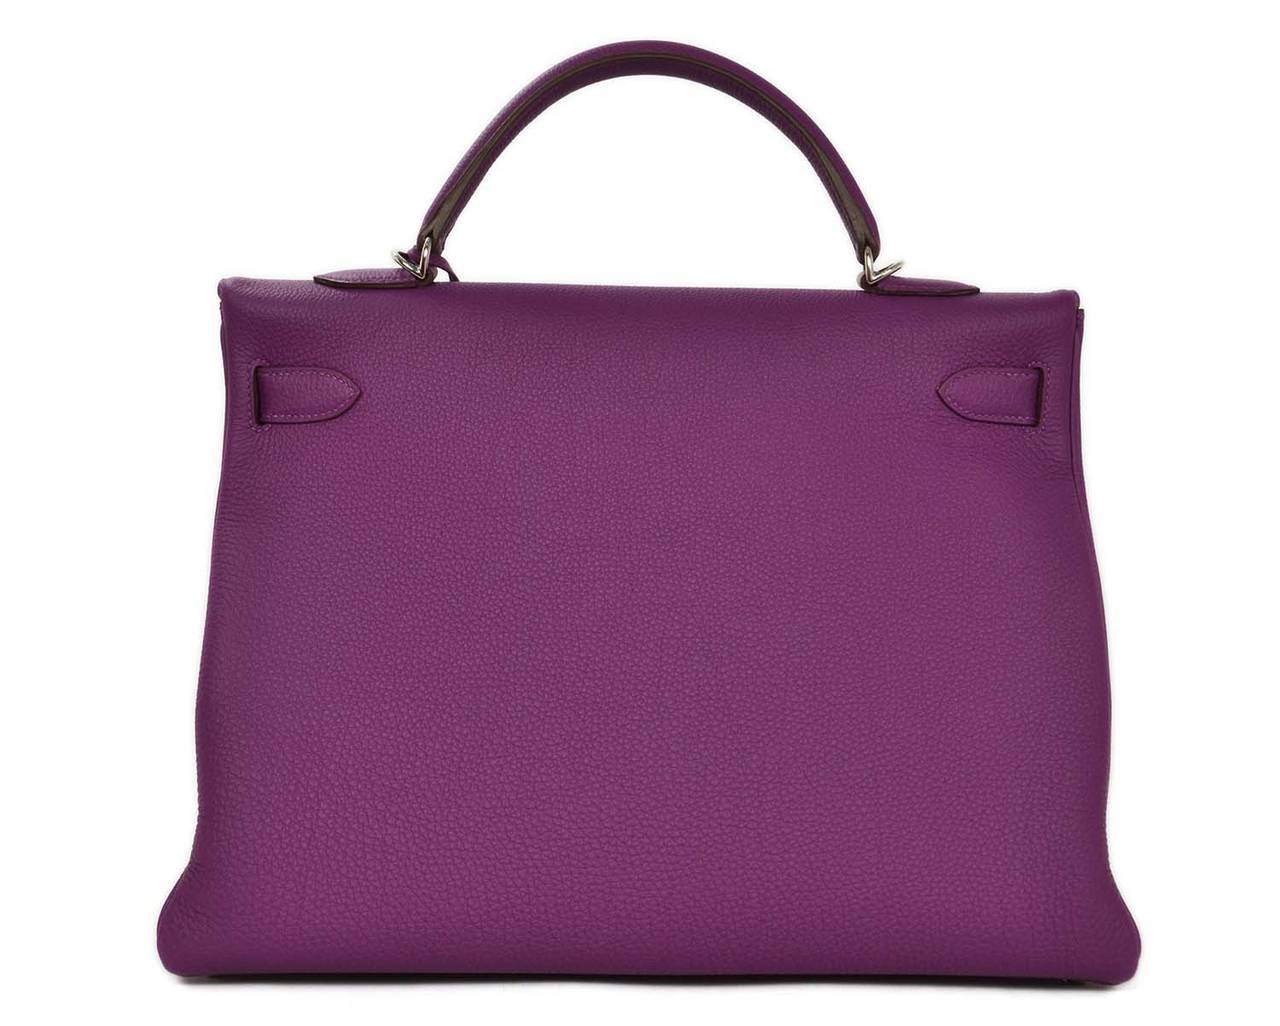 Women's or Men's Hermes New In Box 2014 Anemone Togo Leather 40cm Kelly Bag Phw